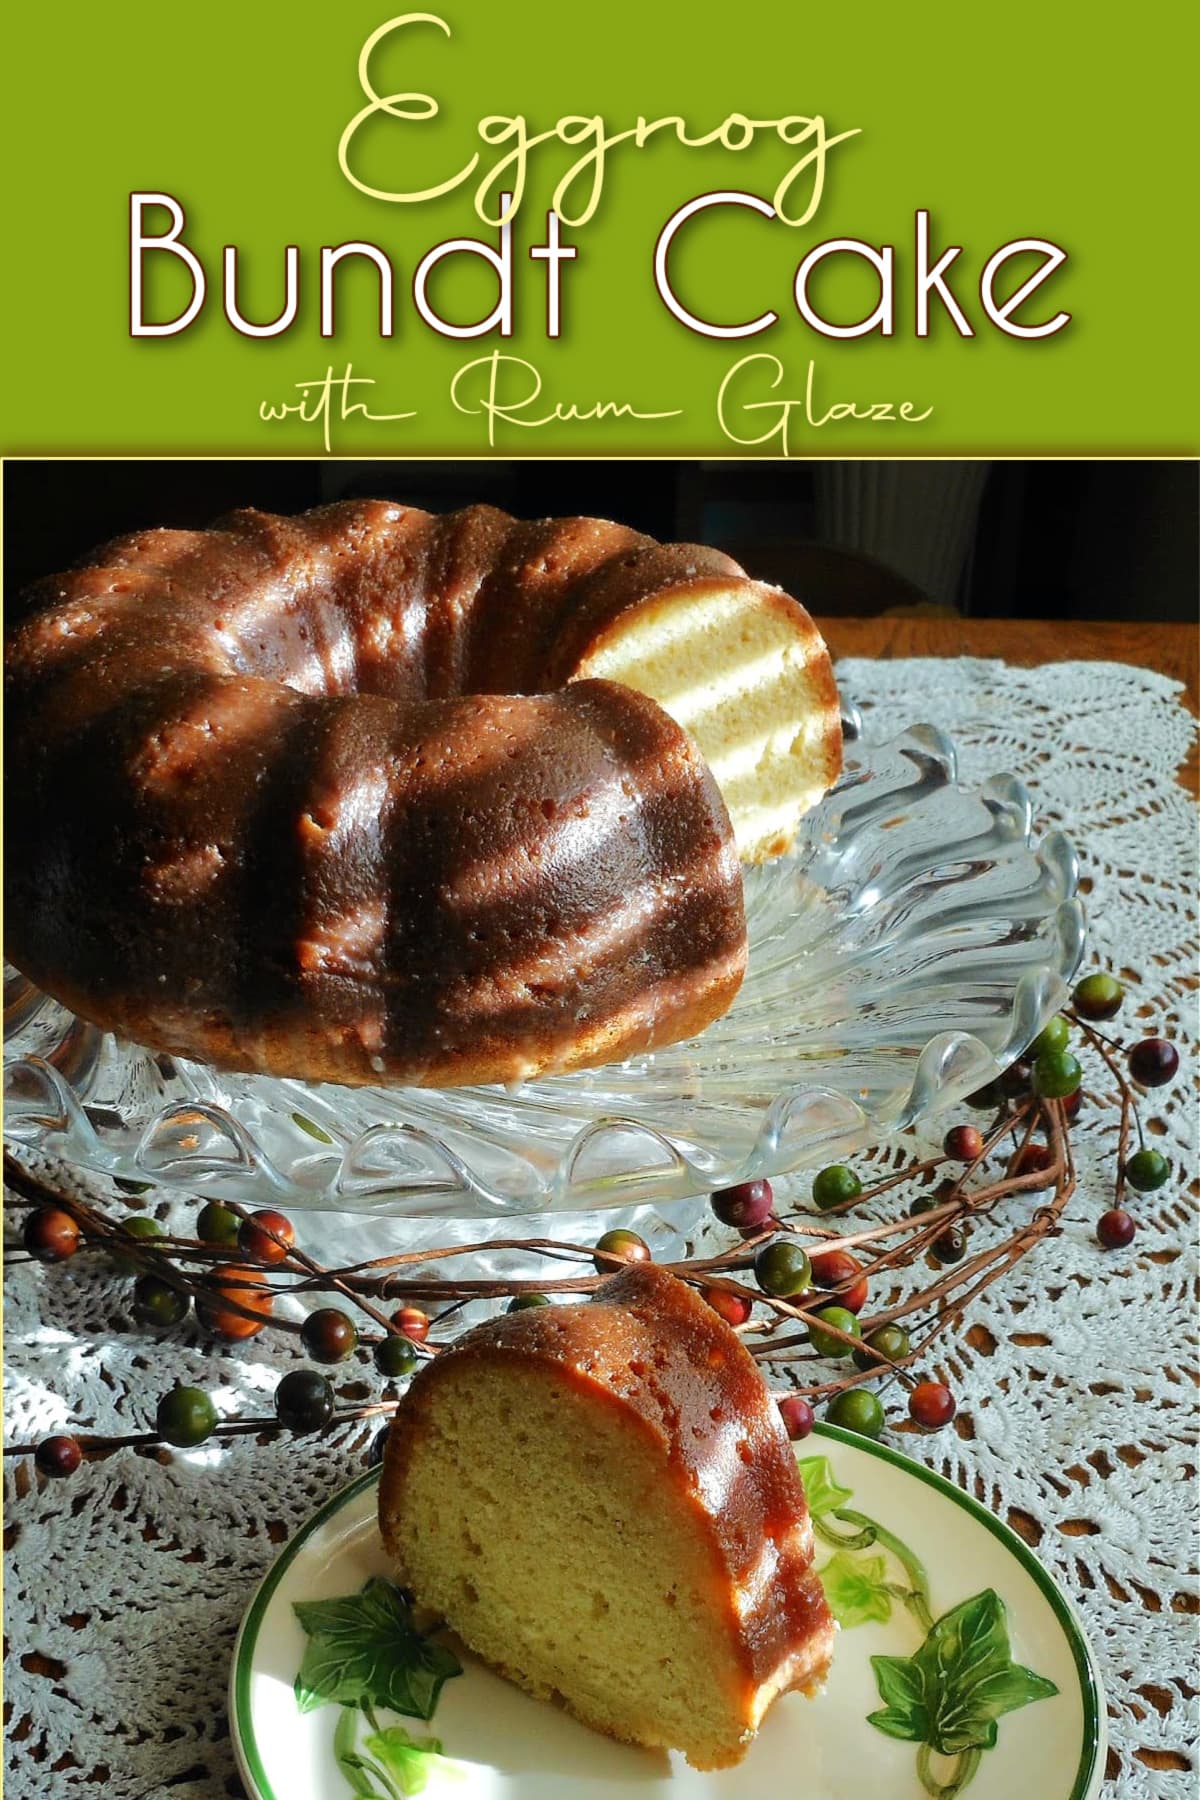 Bundt cake on cake platter, with one slice cut and on a dessert plate.